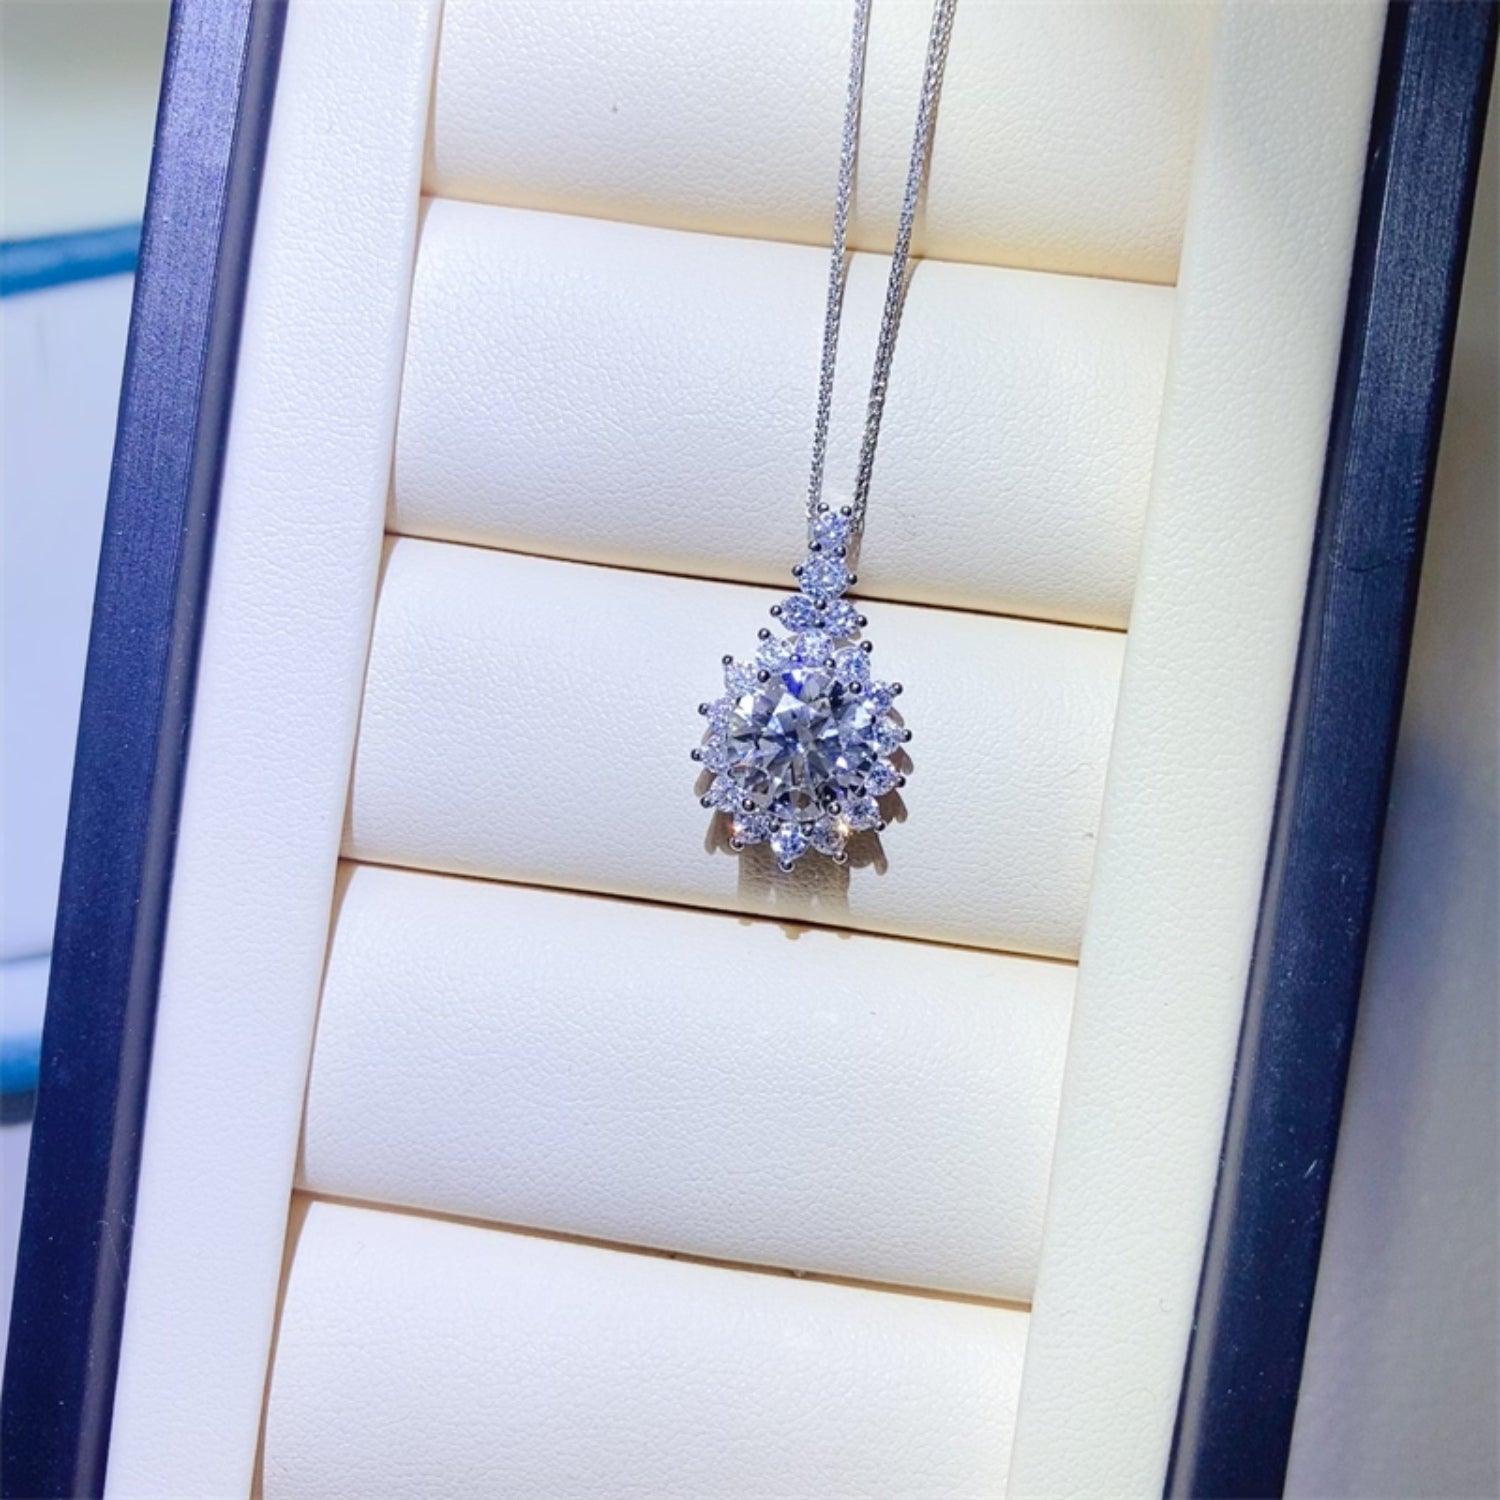 a necklace with a cluster of diamonds on it